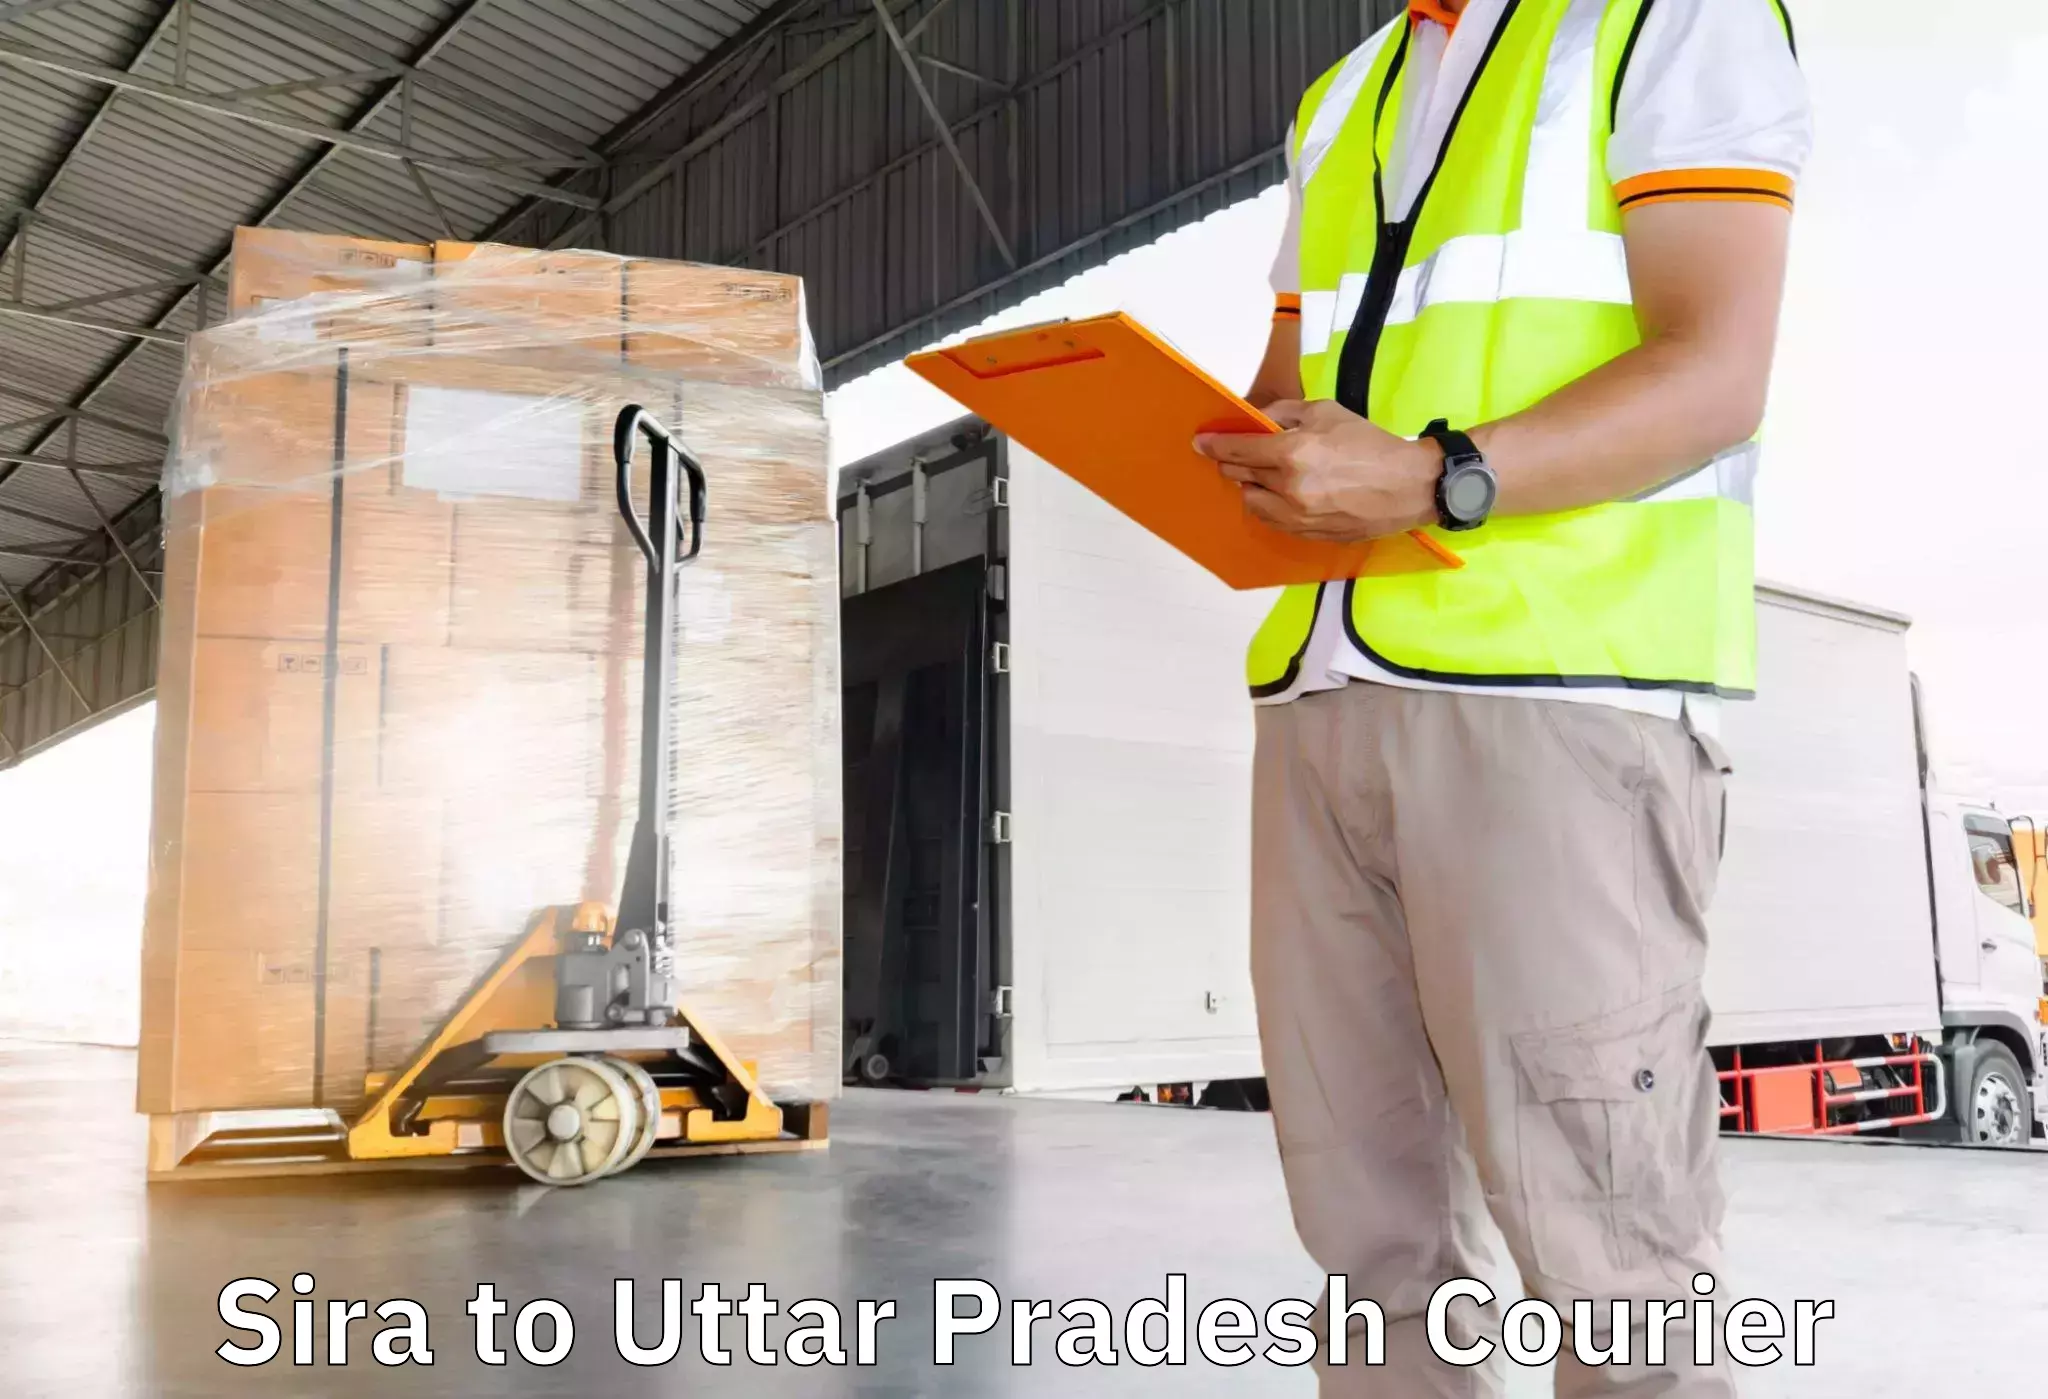 Hassle-free relocation Sira to Vrindavan